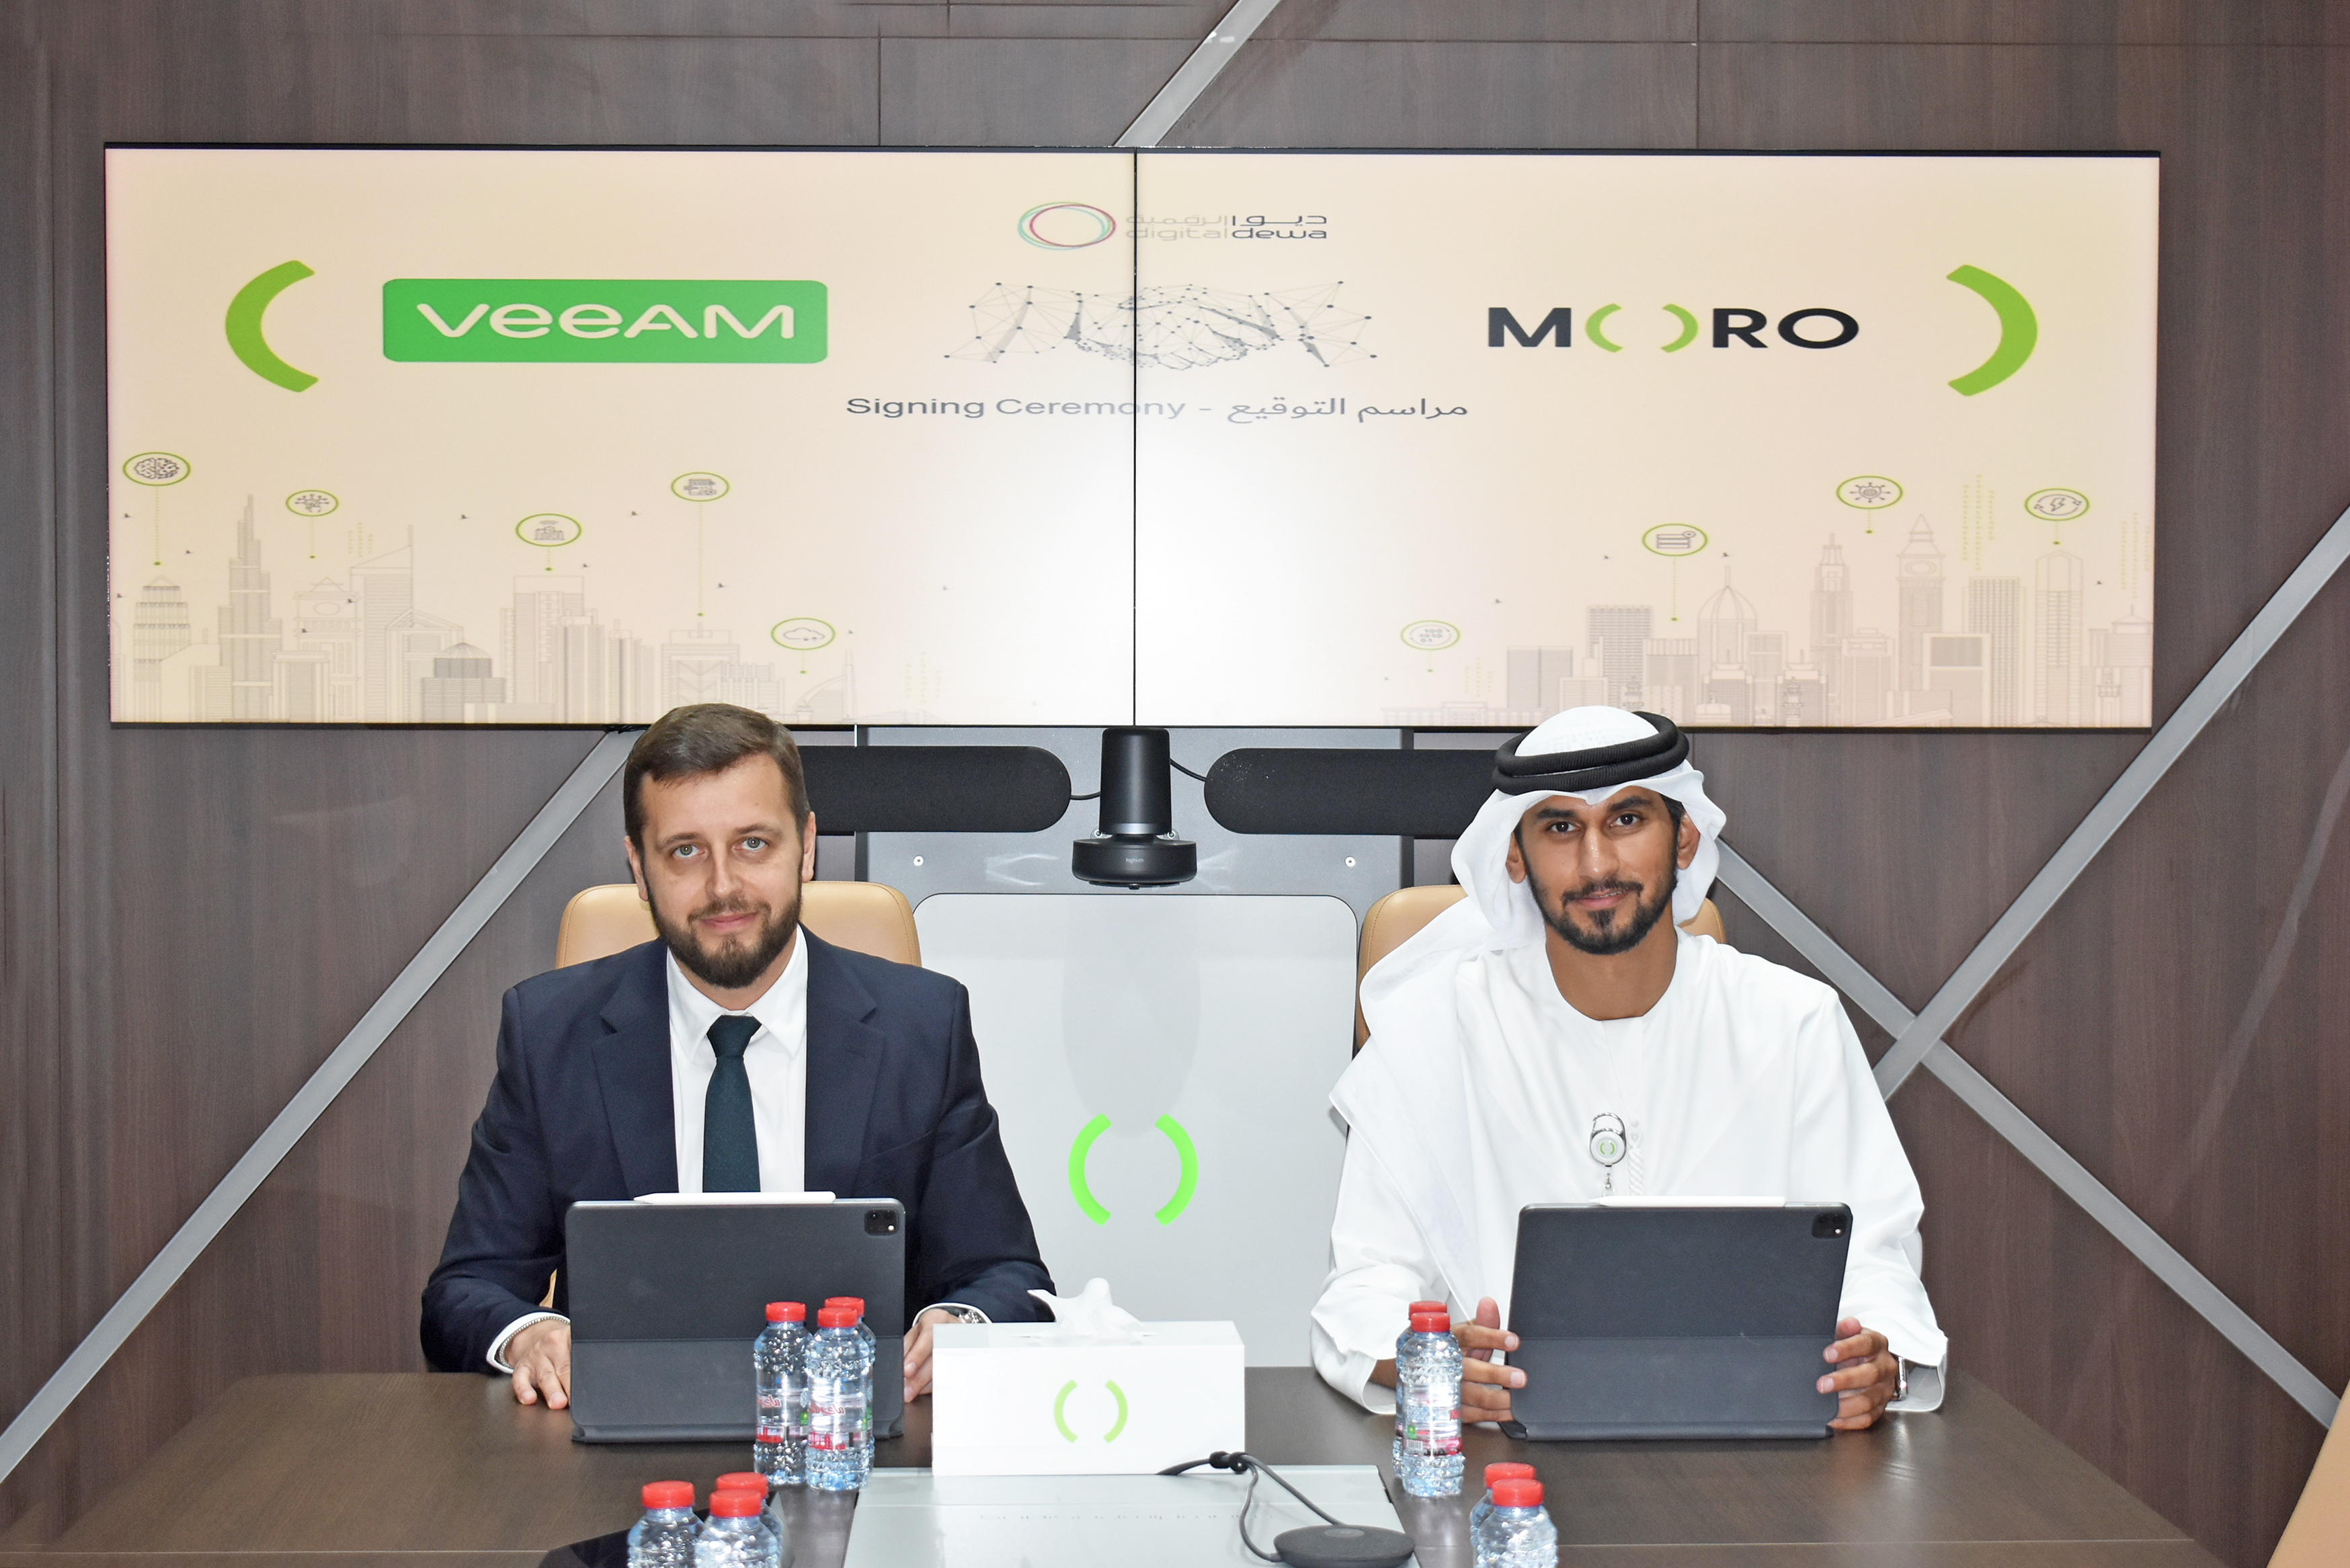 Moro Hub Partners with Veeam to Enhance Data Protection for Public and Private Enterprises in the UAE